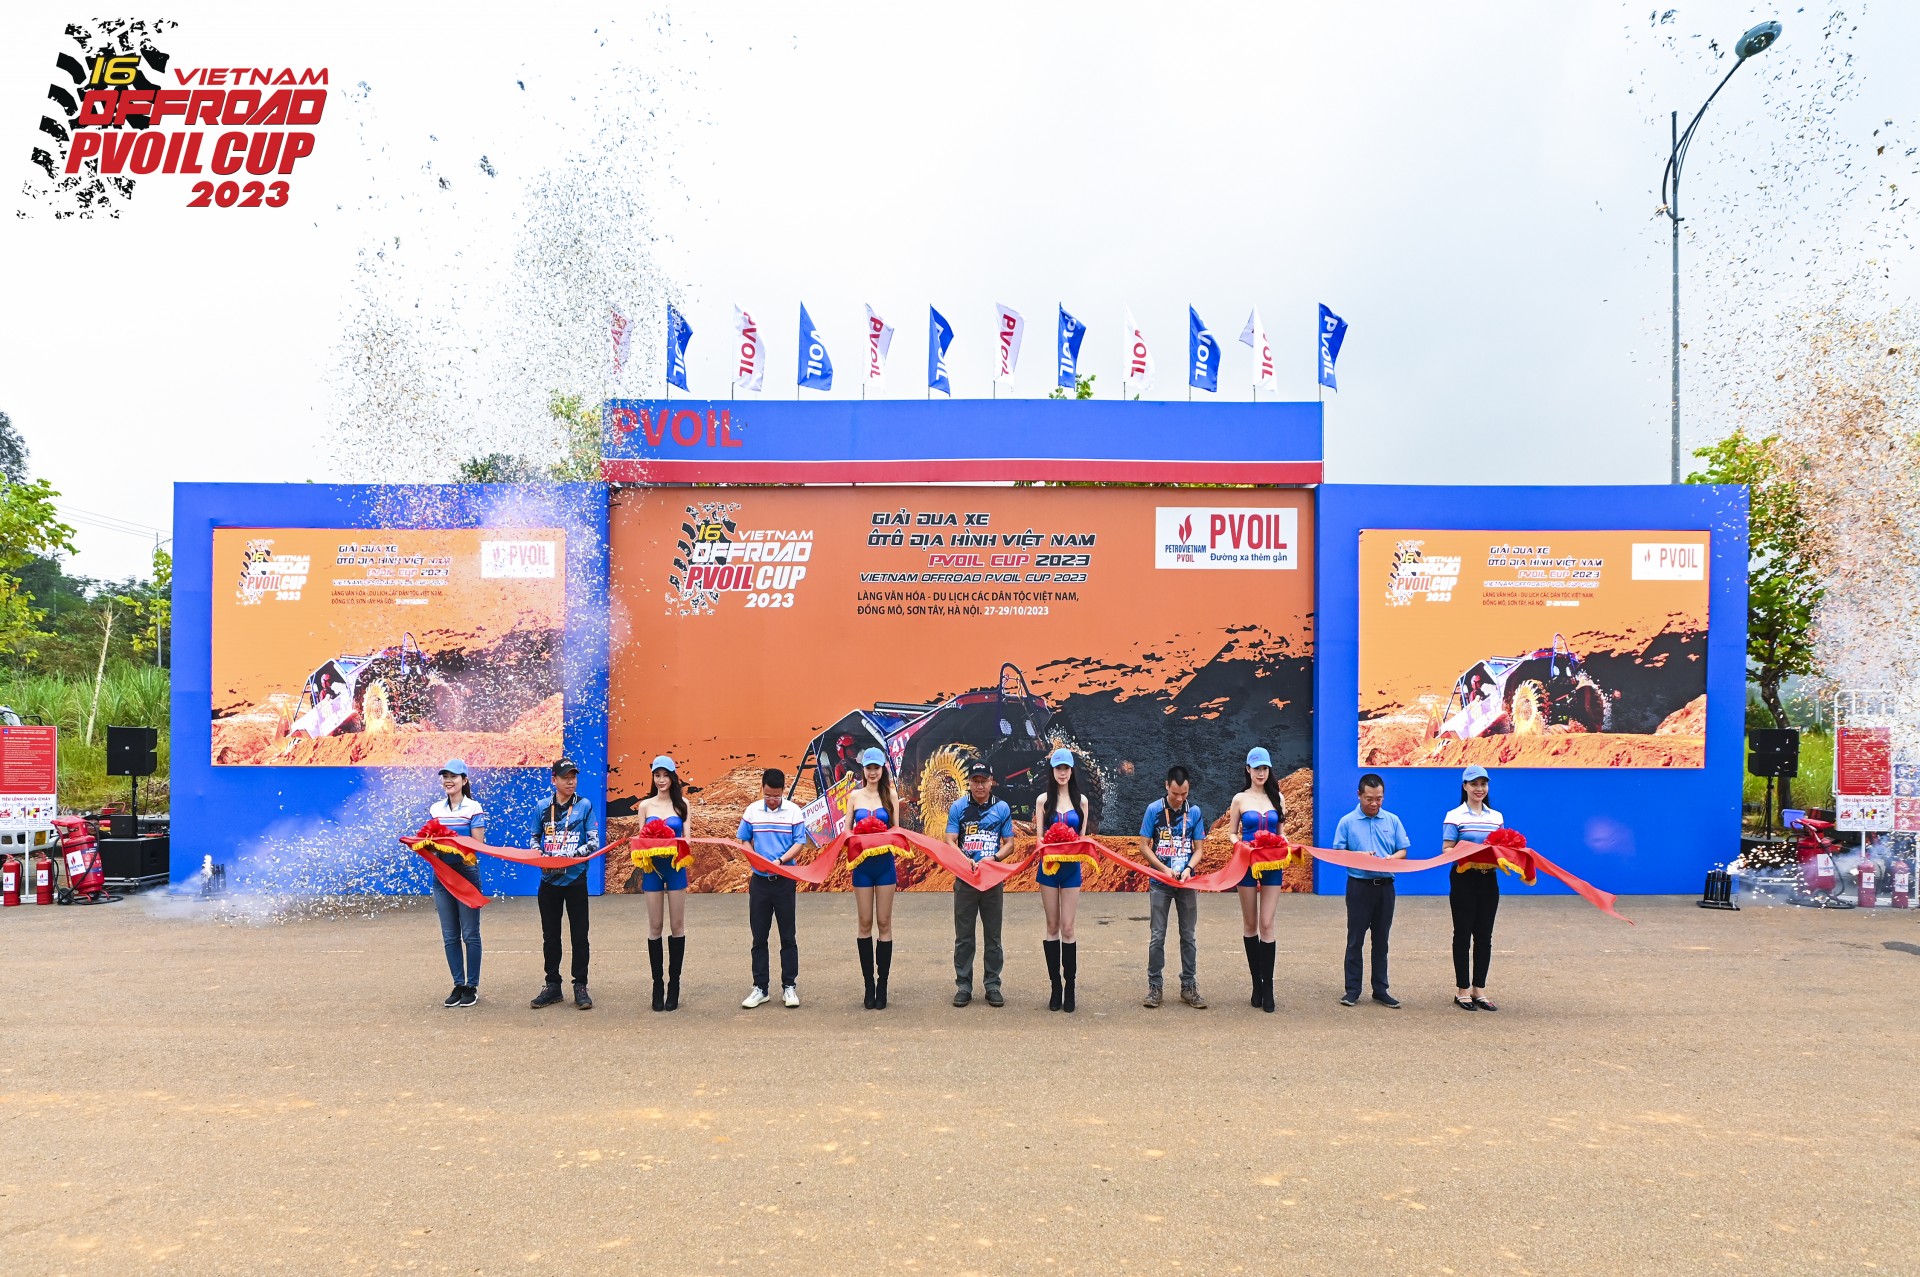 Vietnam Offroad PVOIL Cup 2023 officially starts in Hanoi